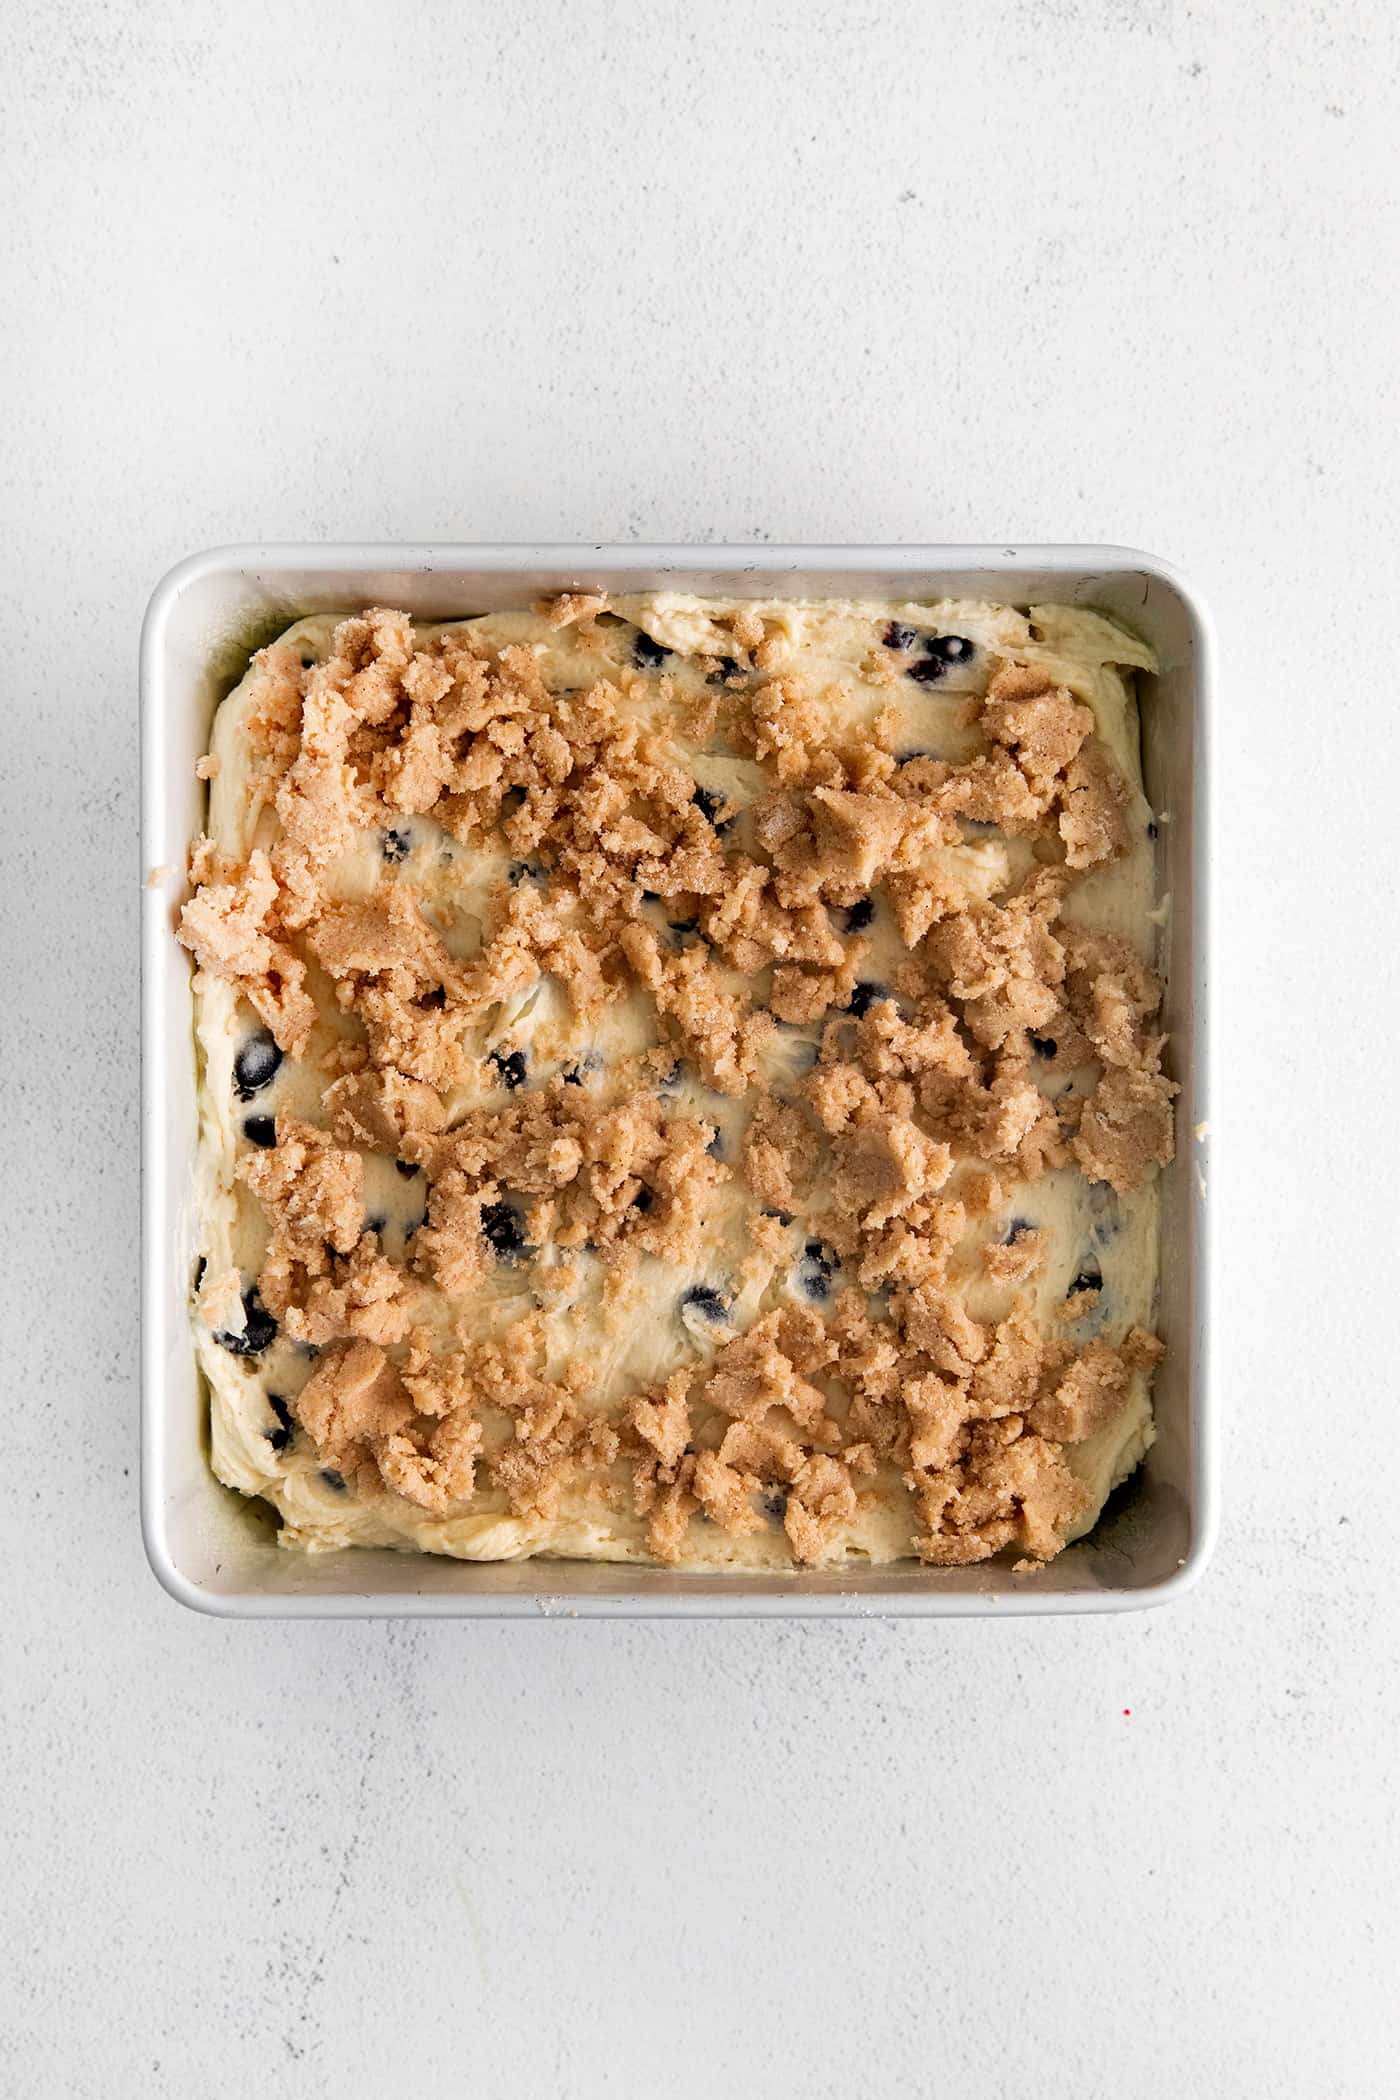 Crumb topping on top of blueberry cake batter